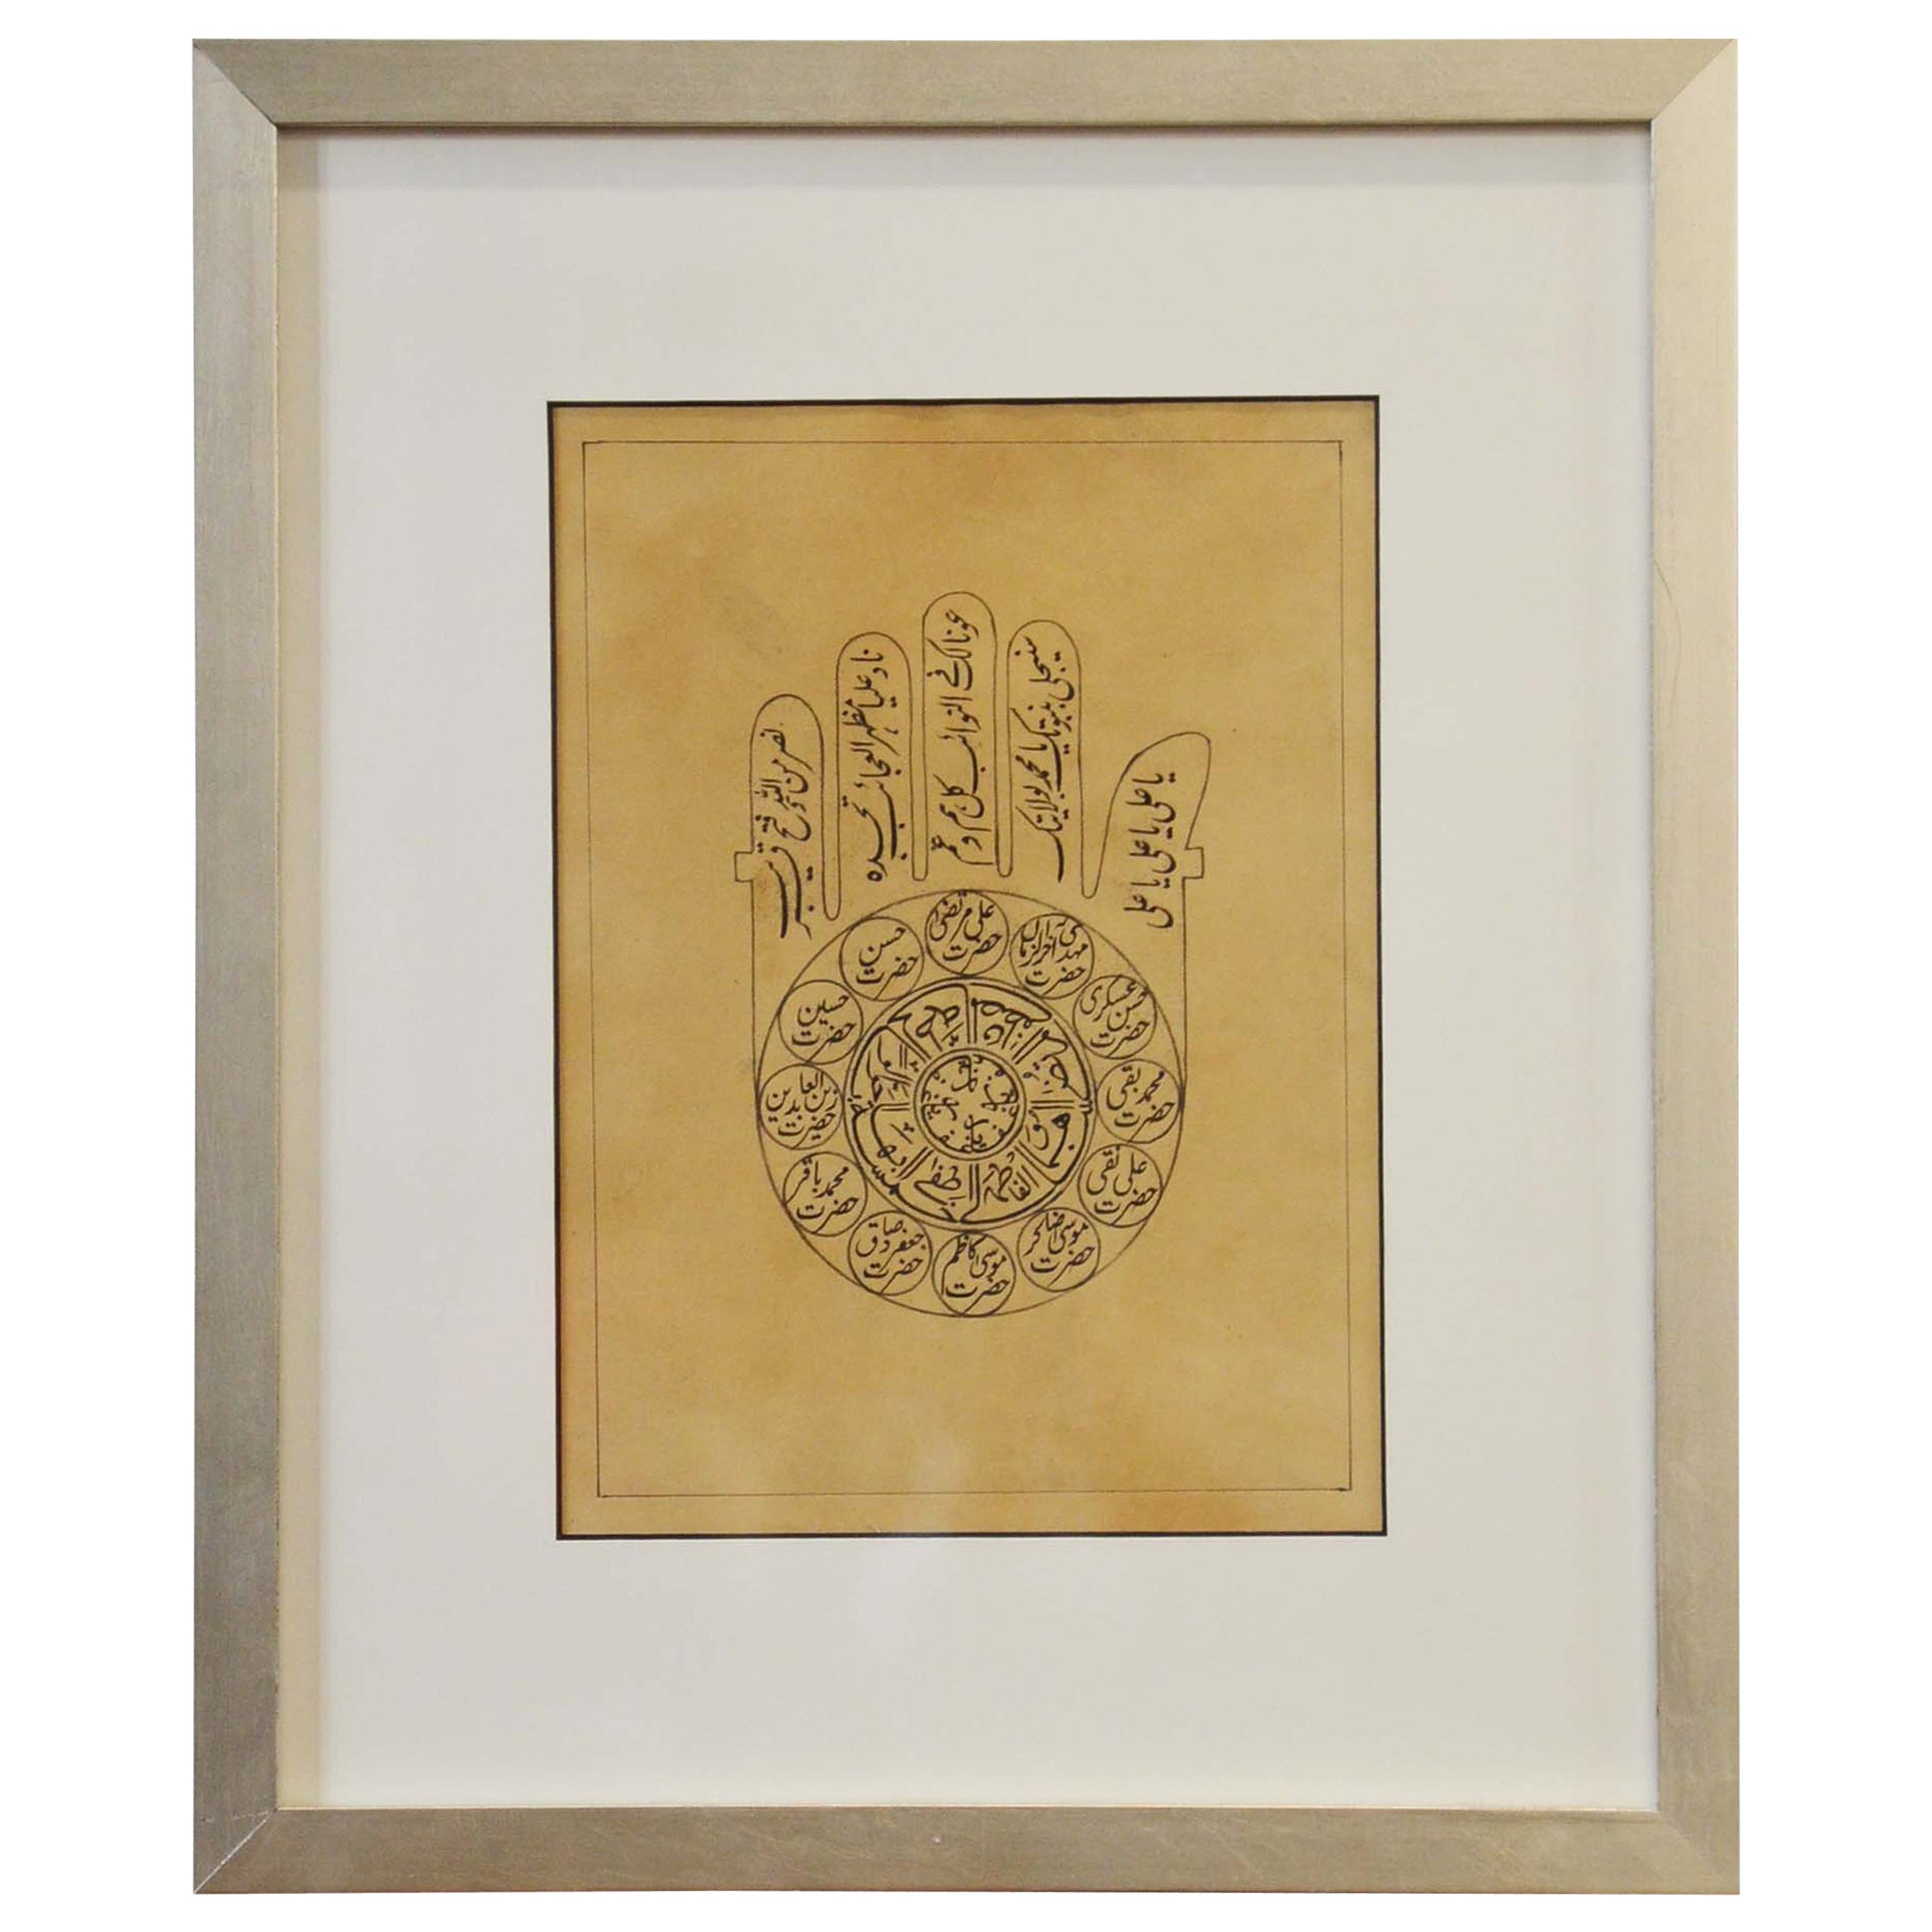 Astrological Hand-Painted on Parchment Print Depicting a Hand with Calligraphy